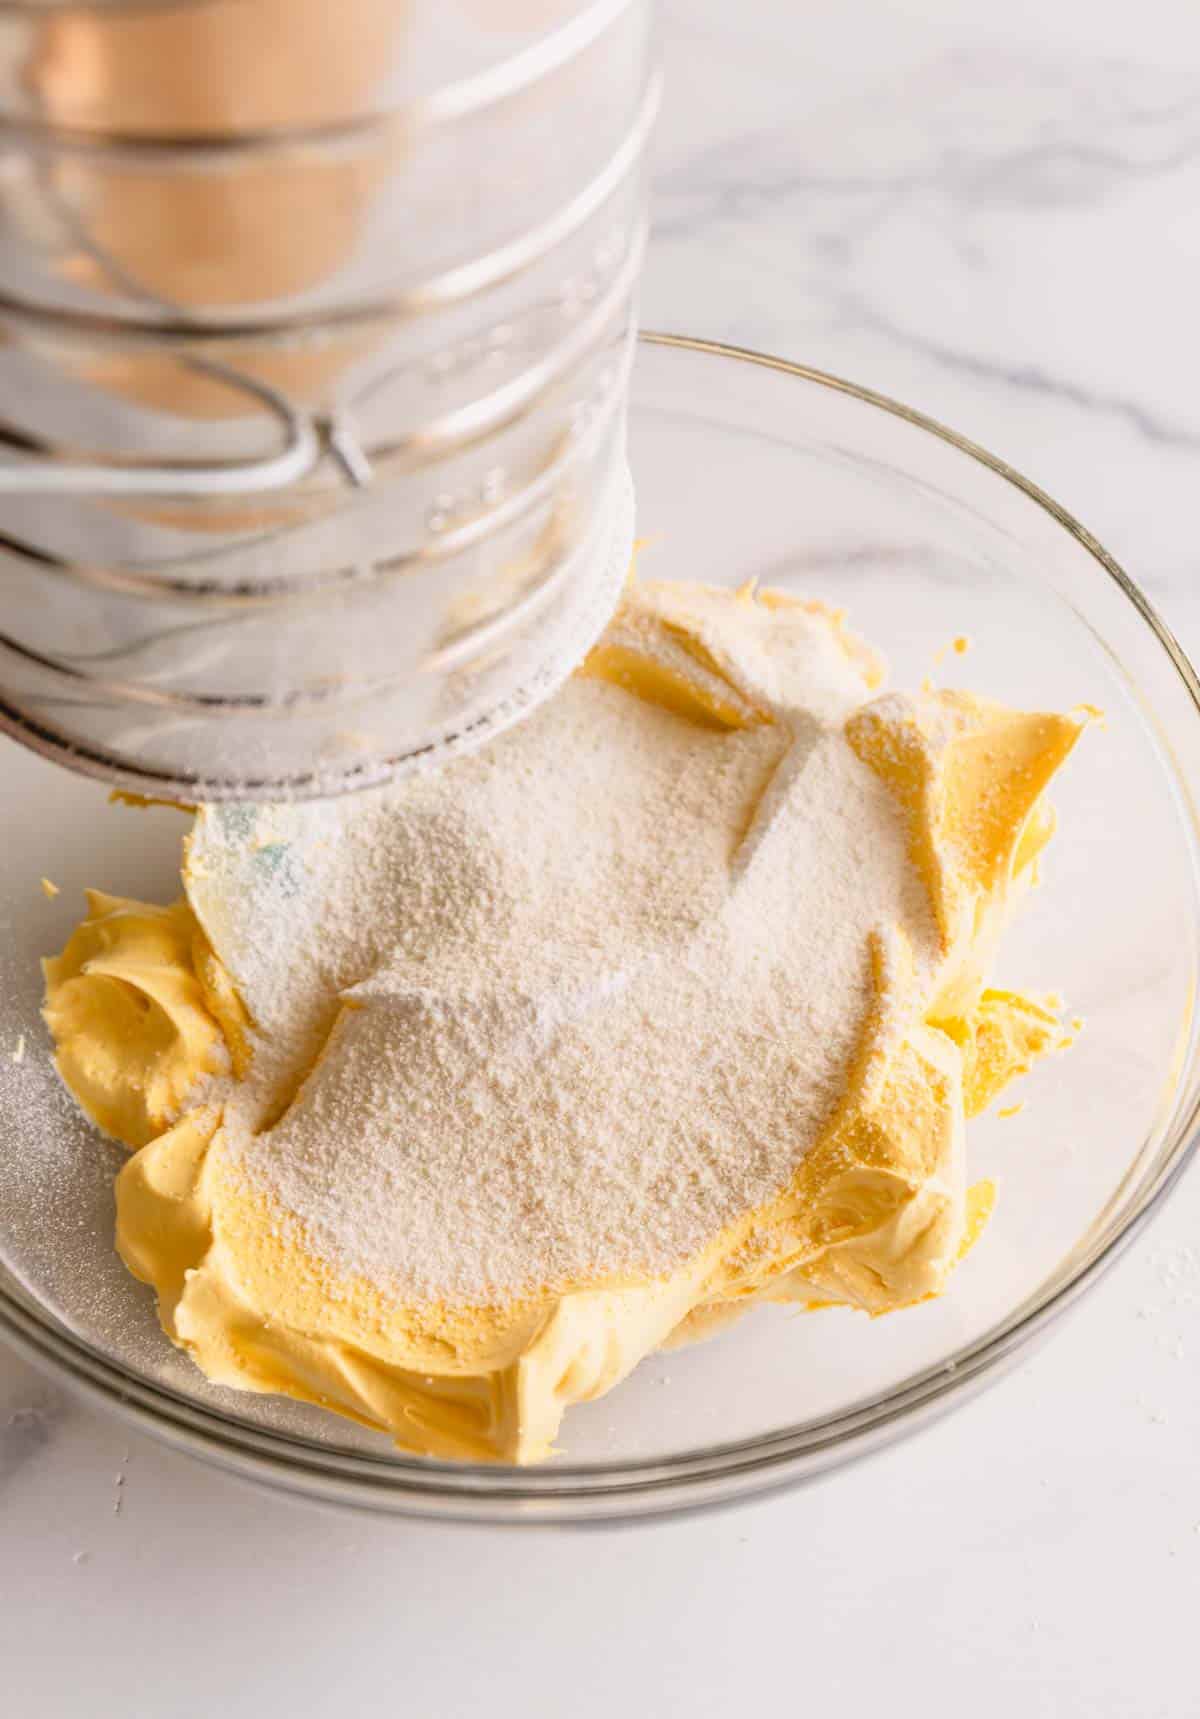 dry ingredients being sifted into the yellow meringue.